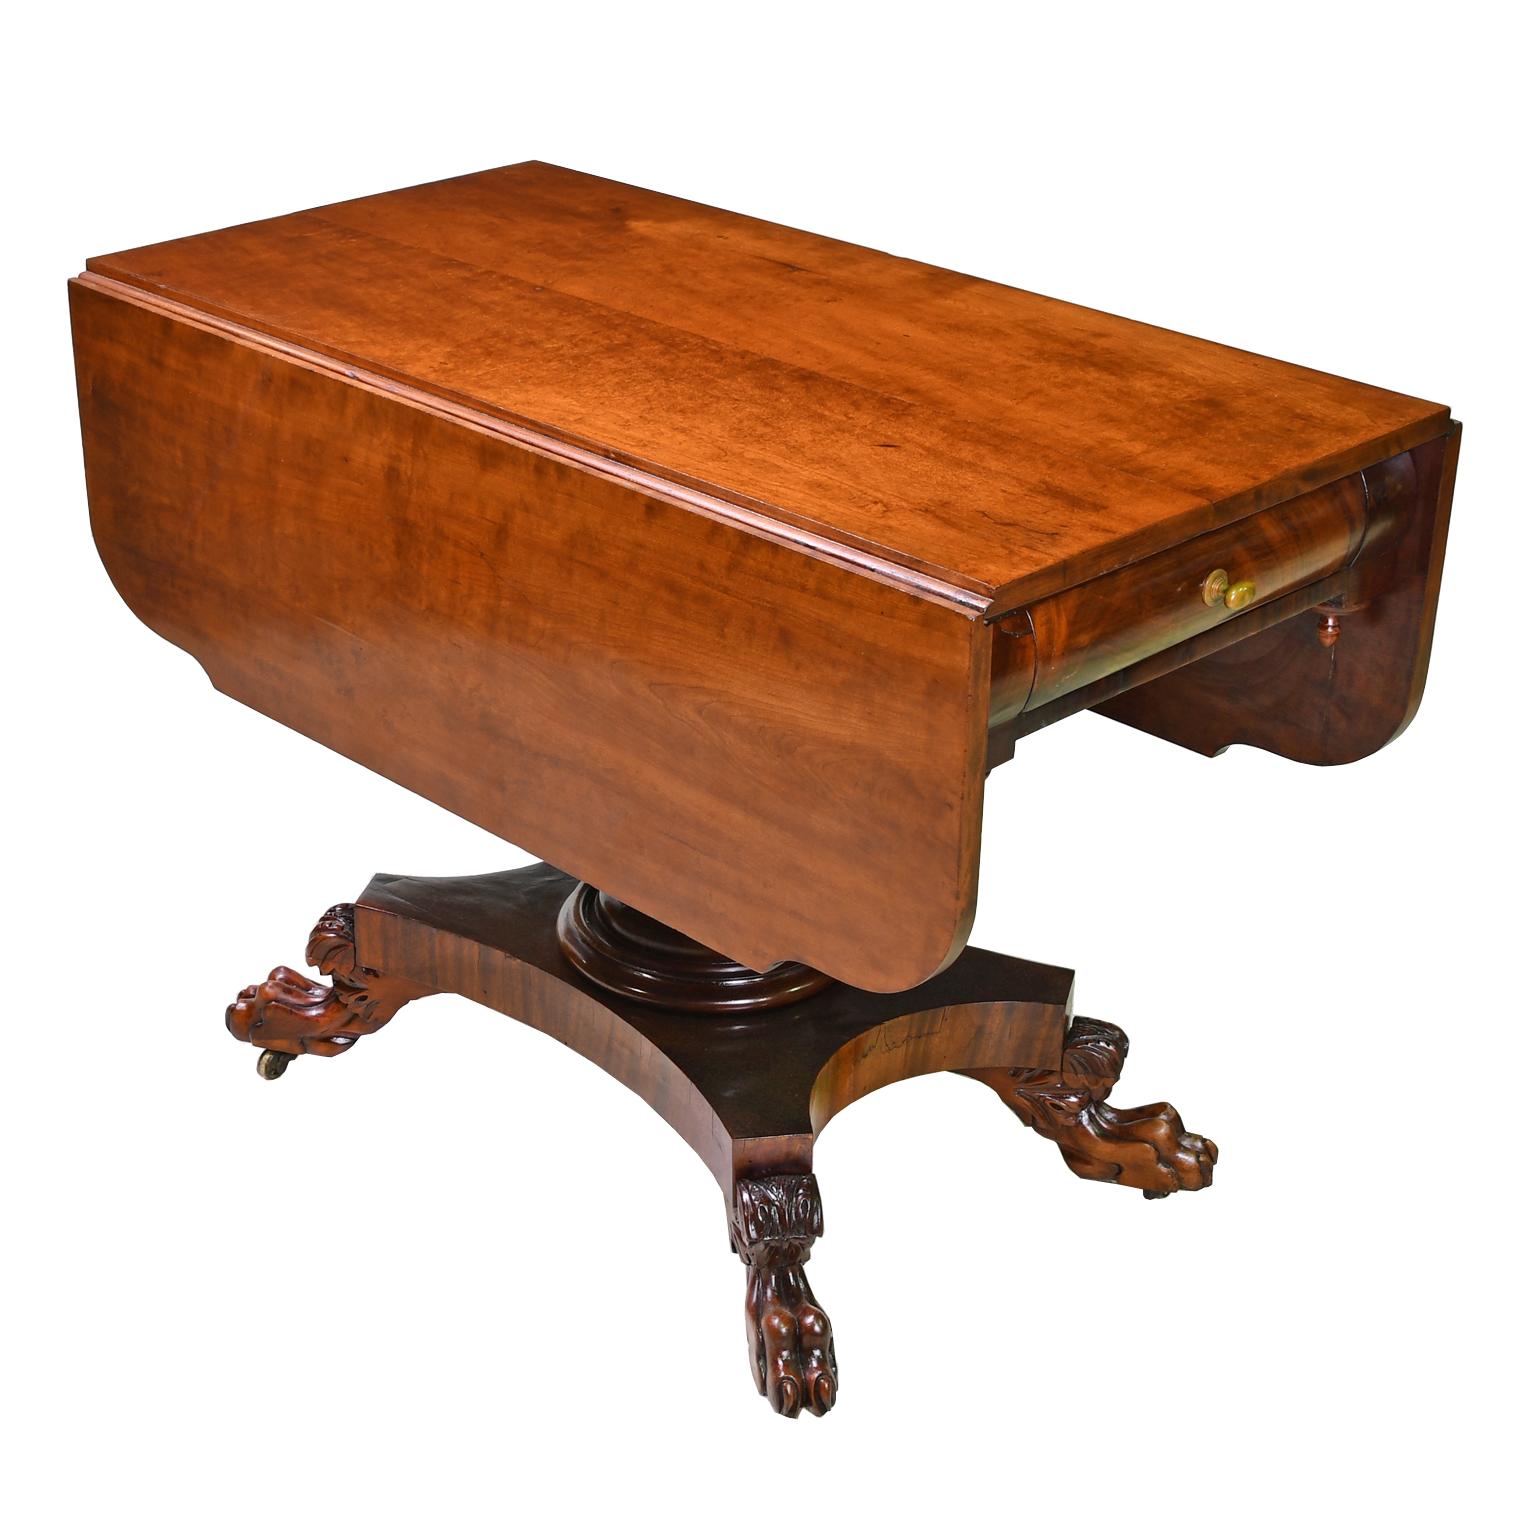 Early American Empire Drop-Leaf/ Pembroke Table in West Indies Mahogany, c. 1830 In Good Condition For Sale In Miami, FL